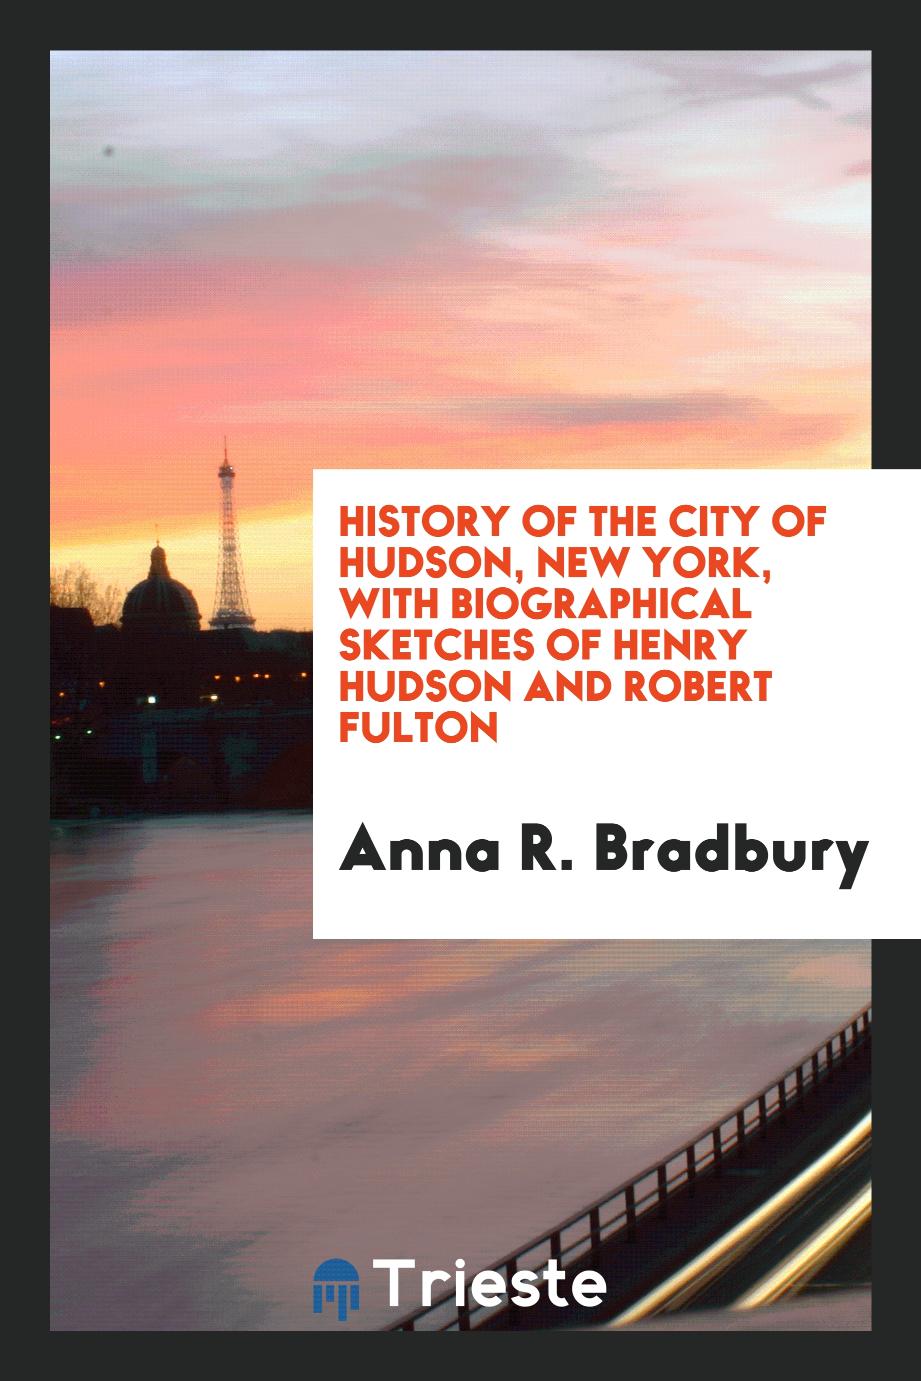 History of the city of Hudson, New York, with biographical sketches of Henry Hudson and Robert Fulton